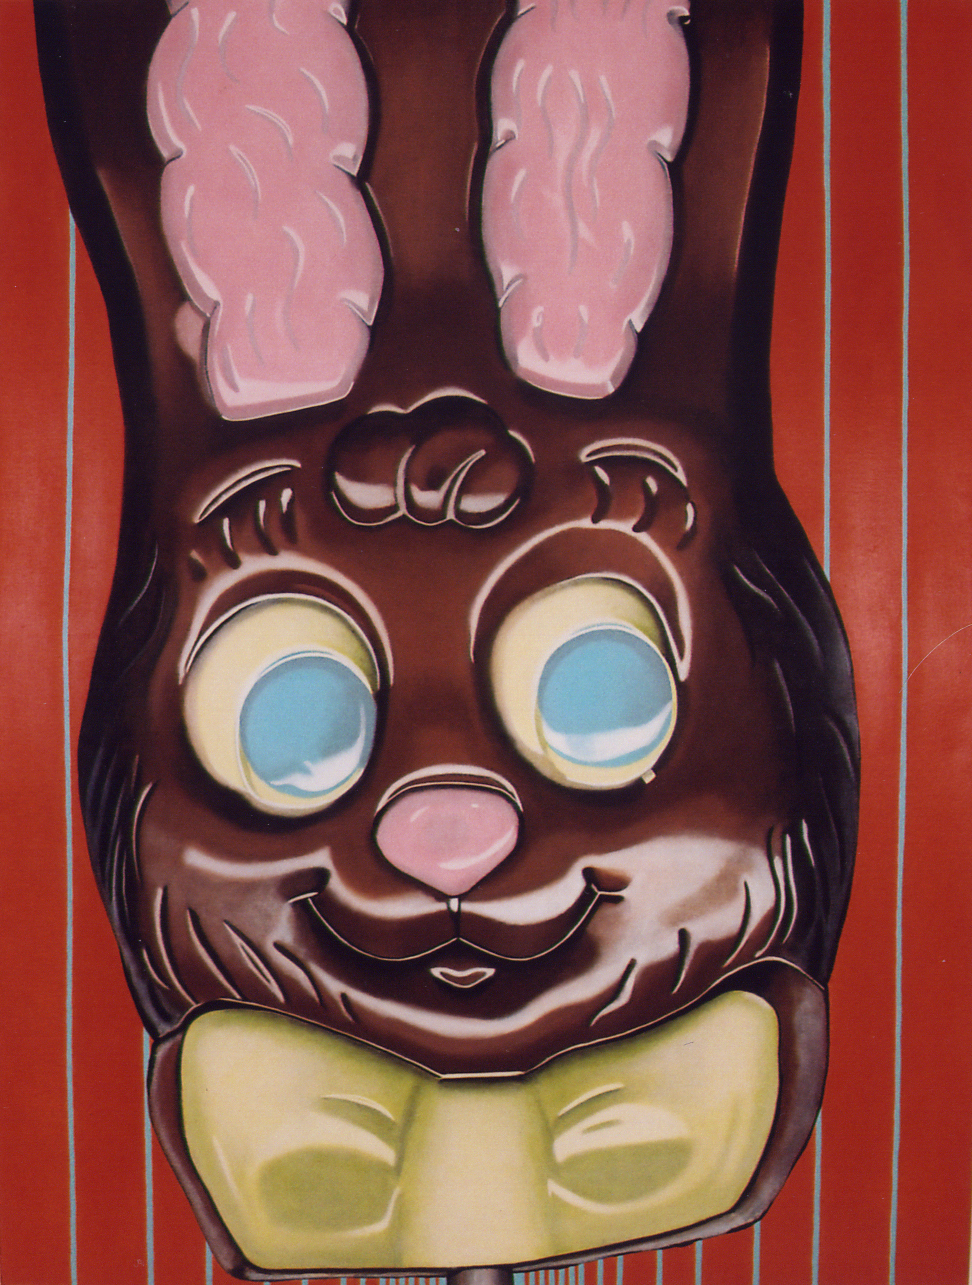 Chocolate Bunny #1--Painting by LJ Lindhurst